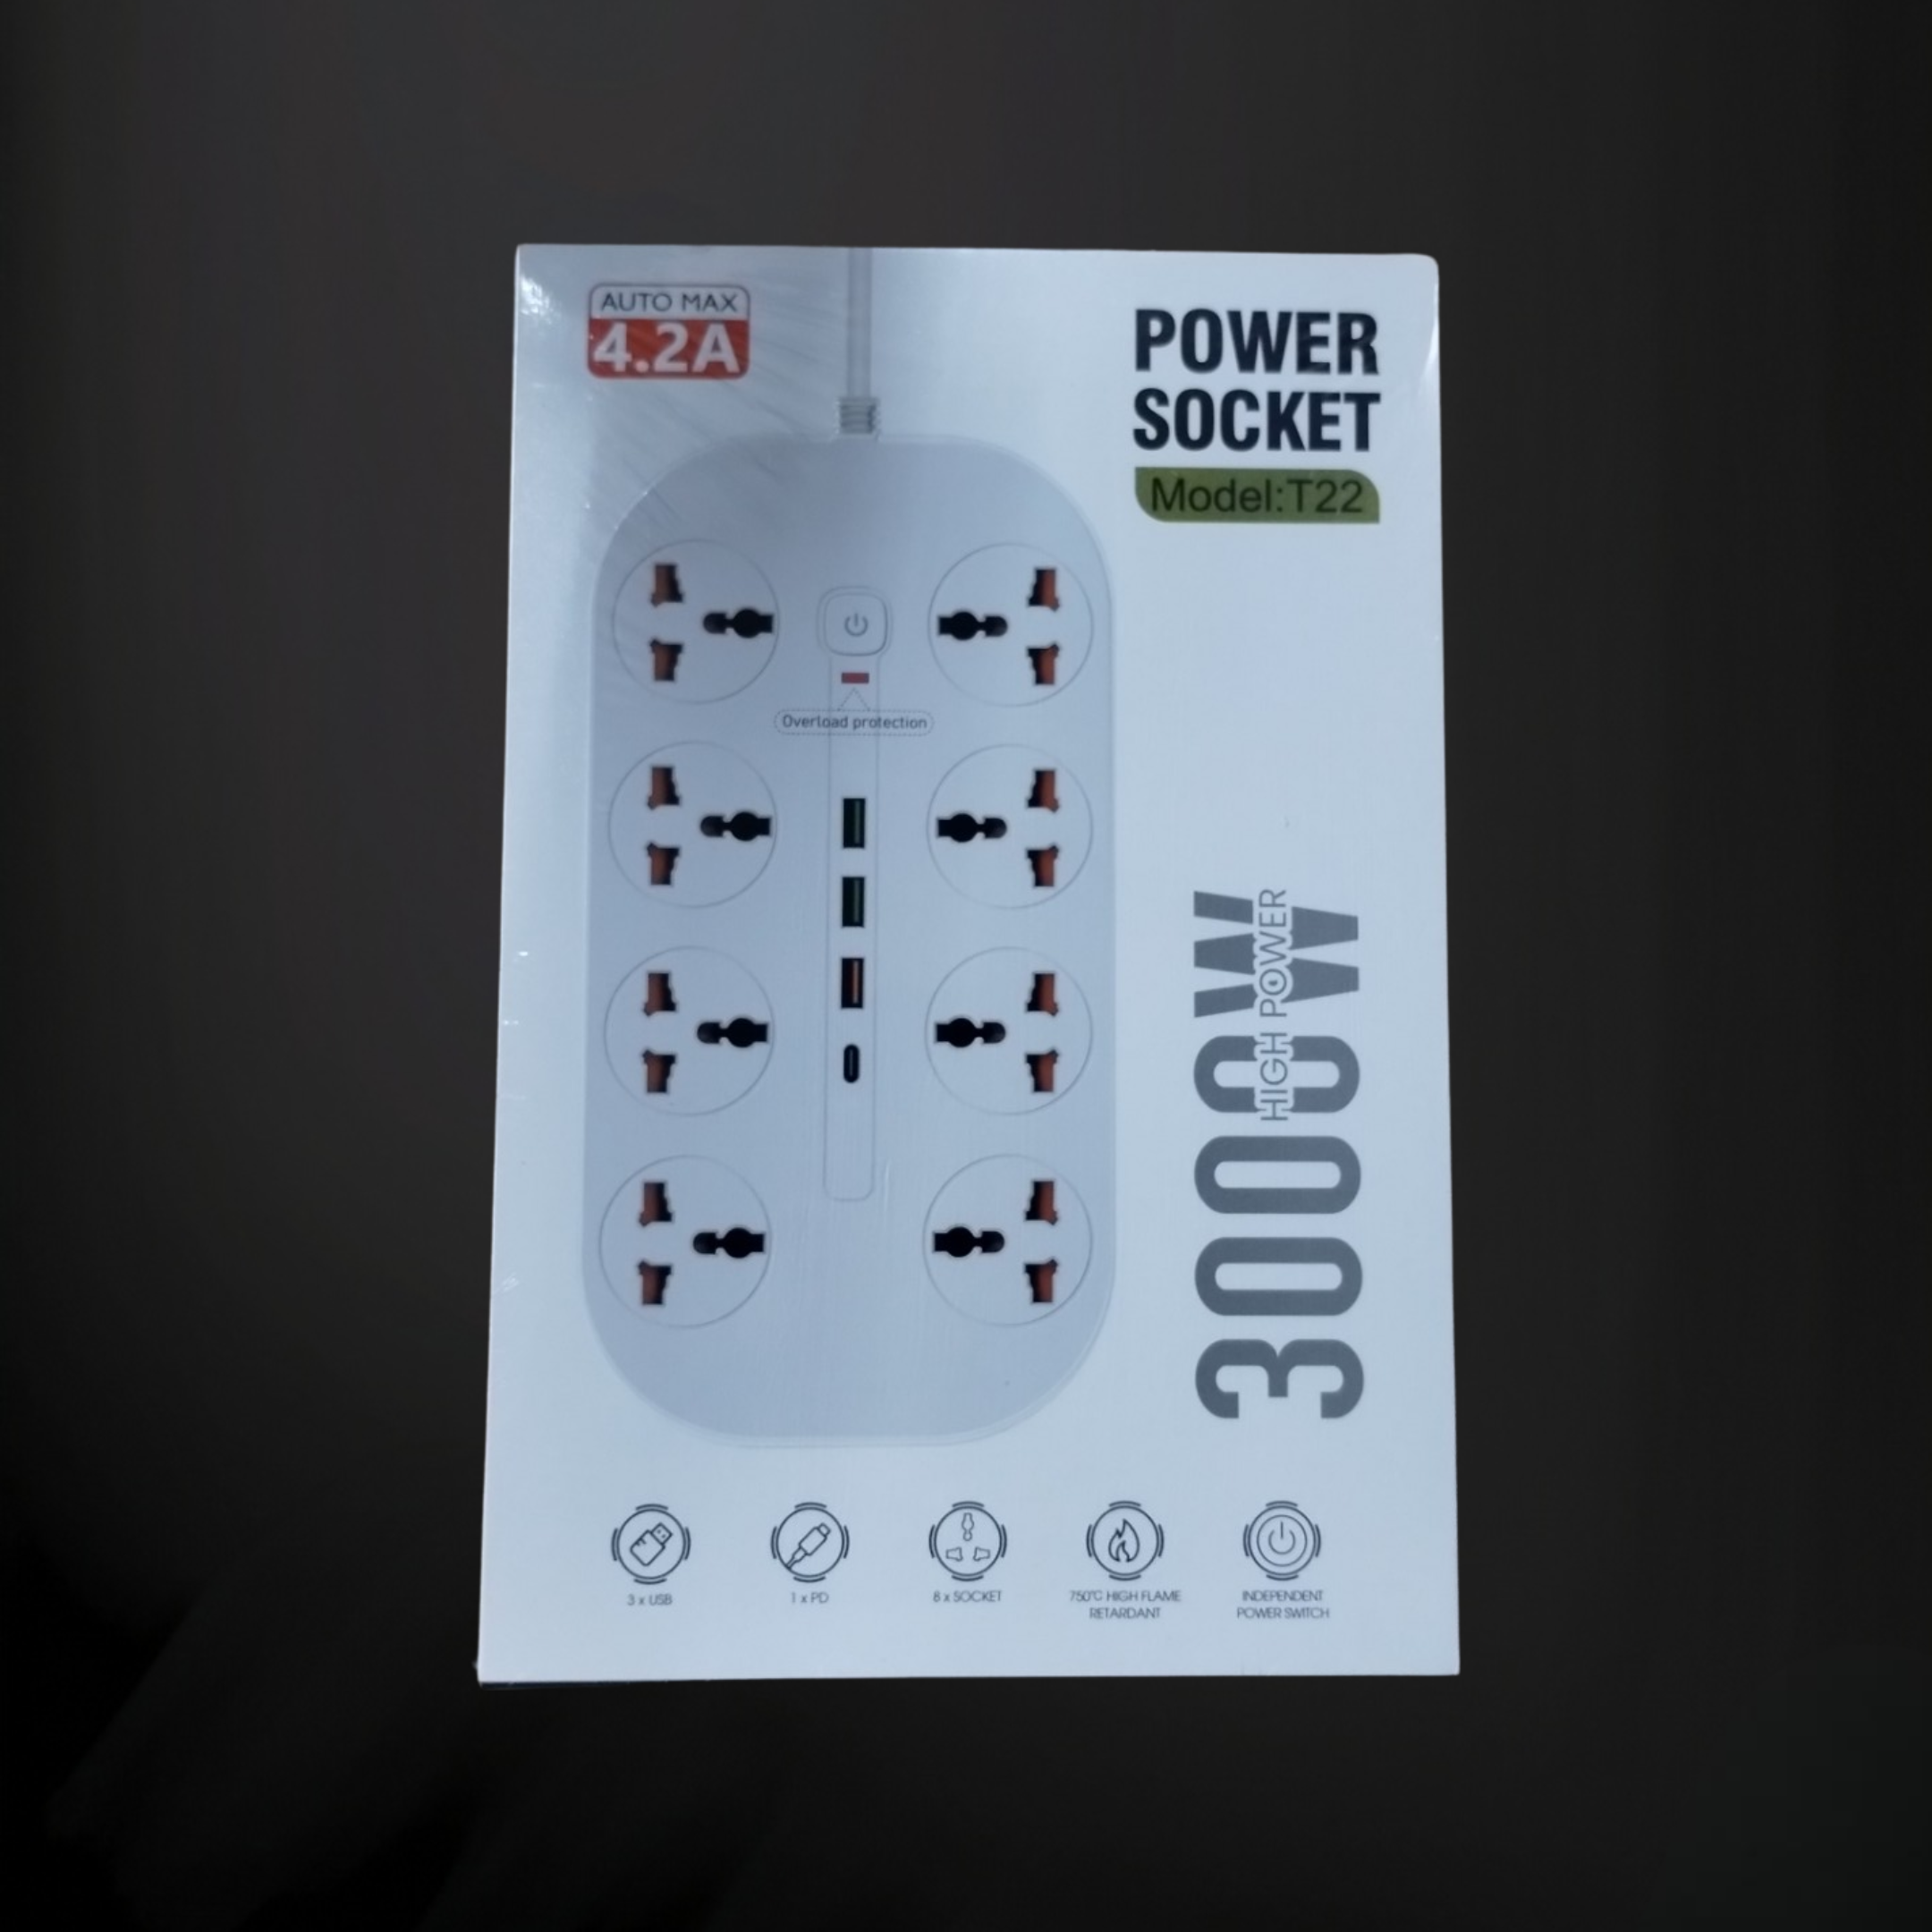 ''High Power 3000-Watt Extension with 8 Sockets, USB Ports, and Type C | Safety Meets Versatility''''''''